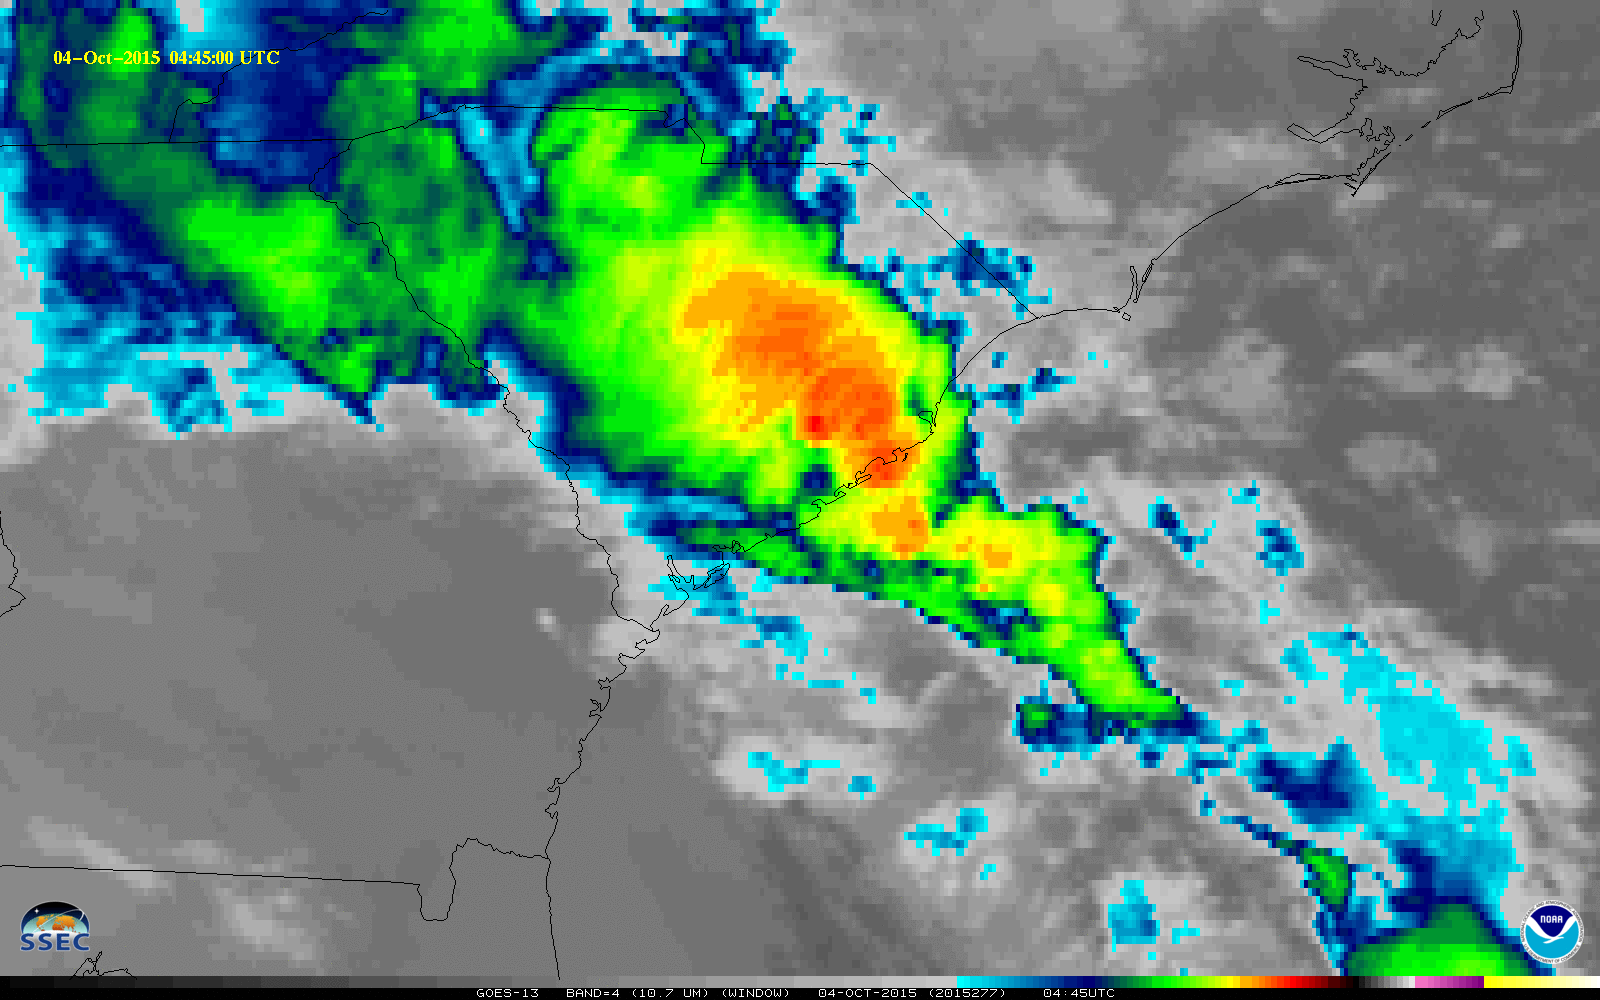 GOES-13 Infrared (10.7 µm) Imagery, 0245 UTC 3 October through 0745 UTC 4 October 2015 [click to animate]